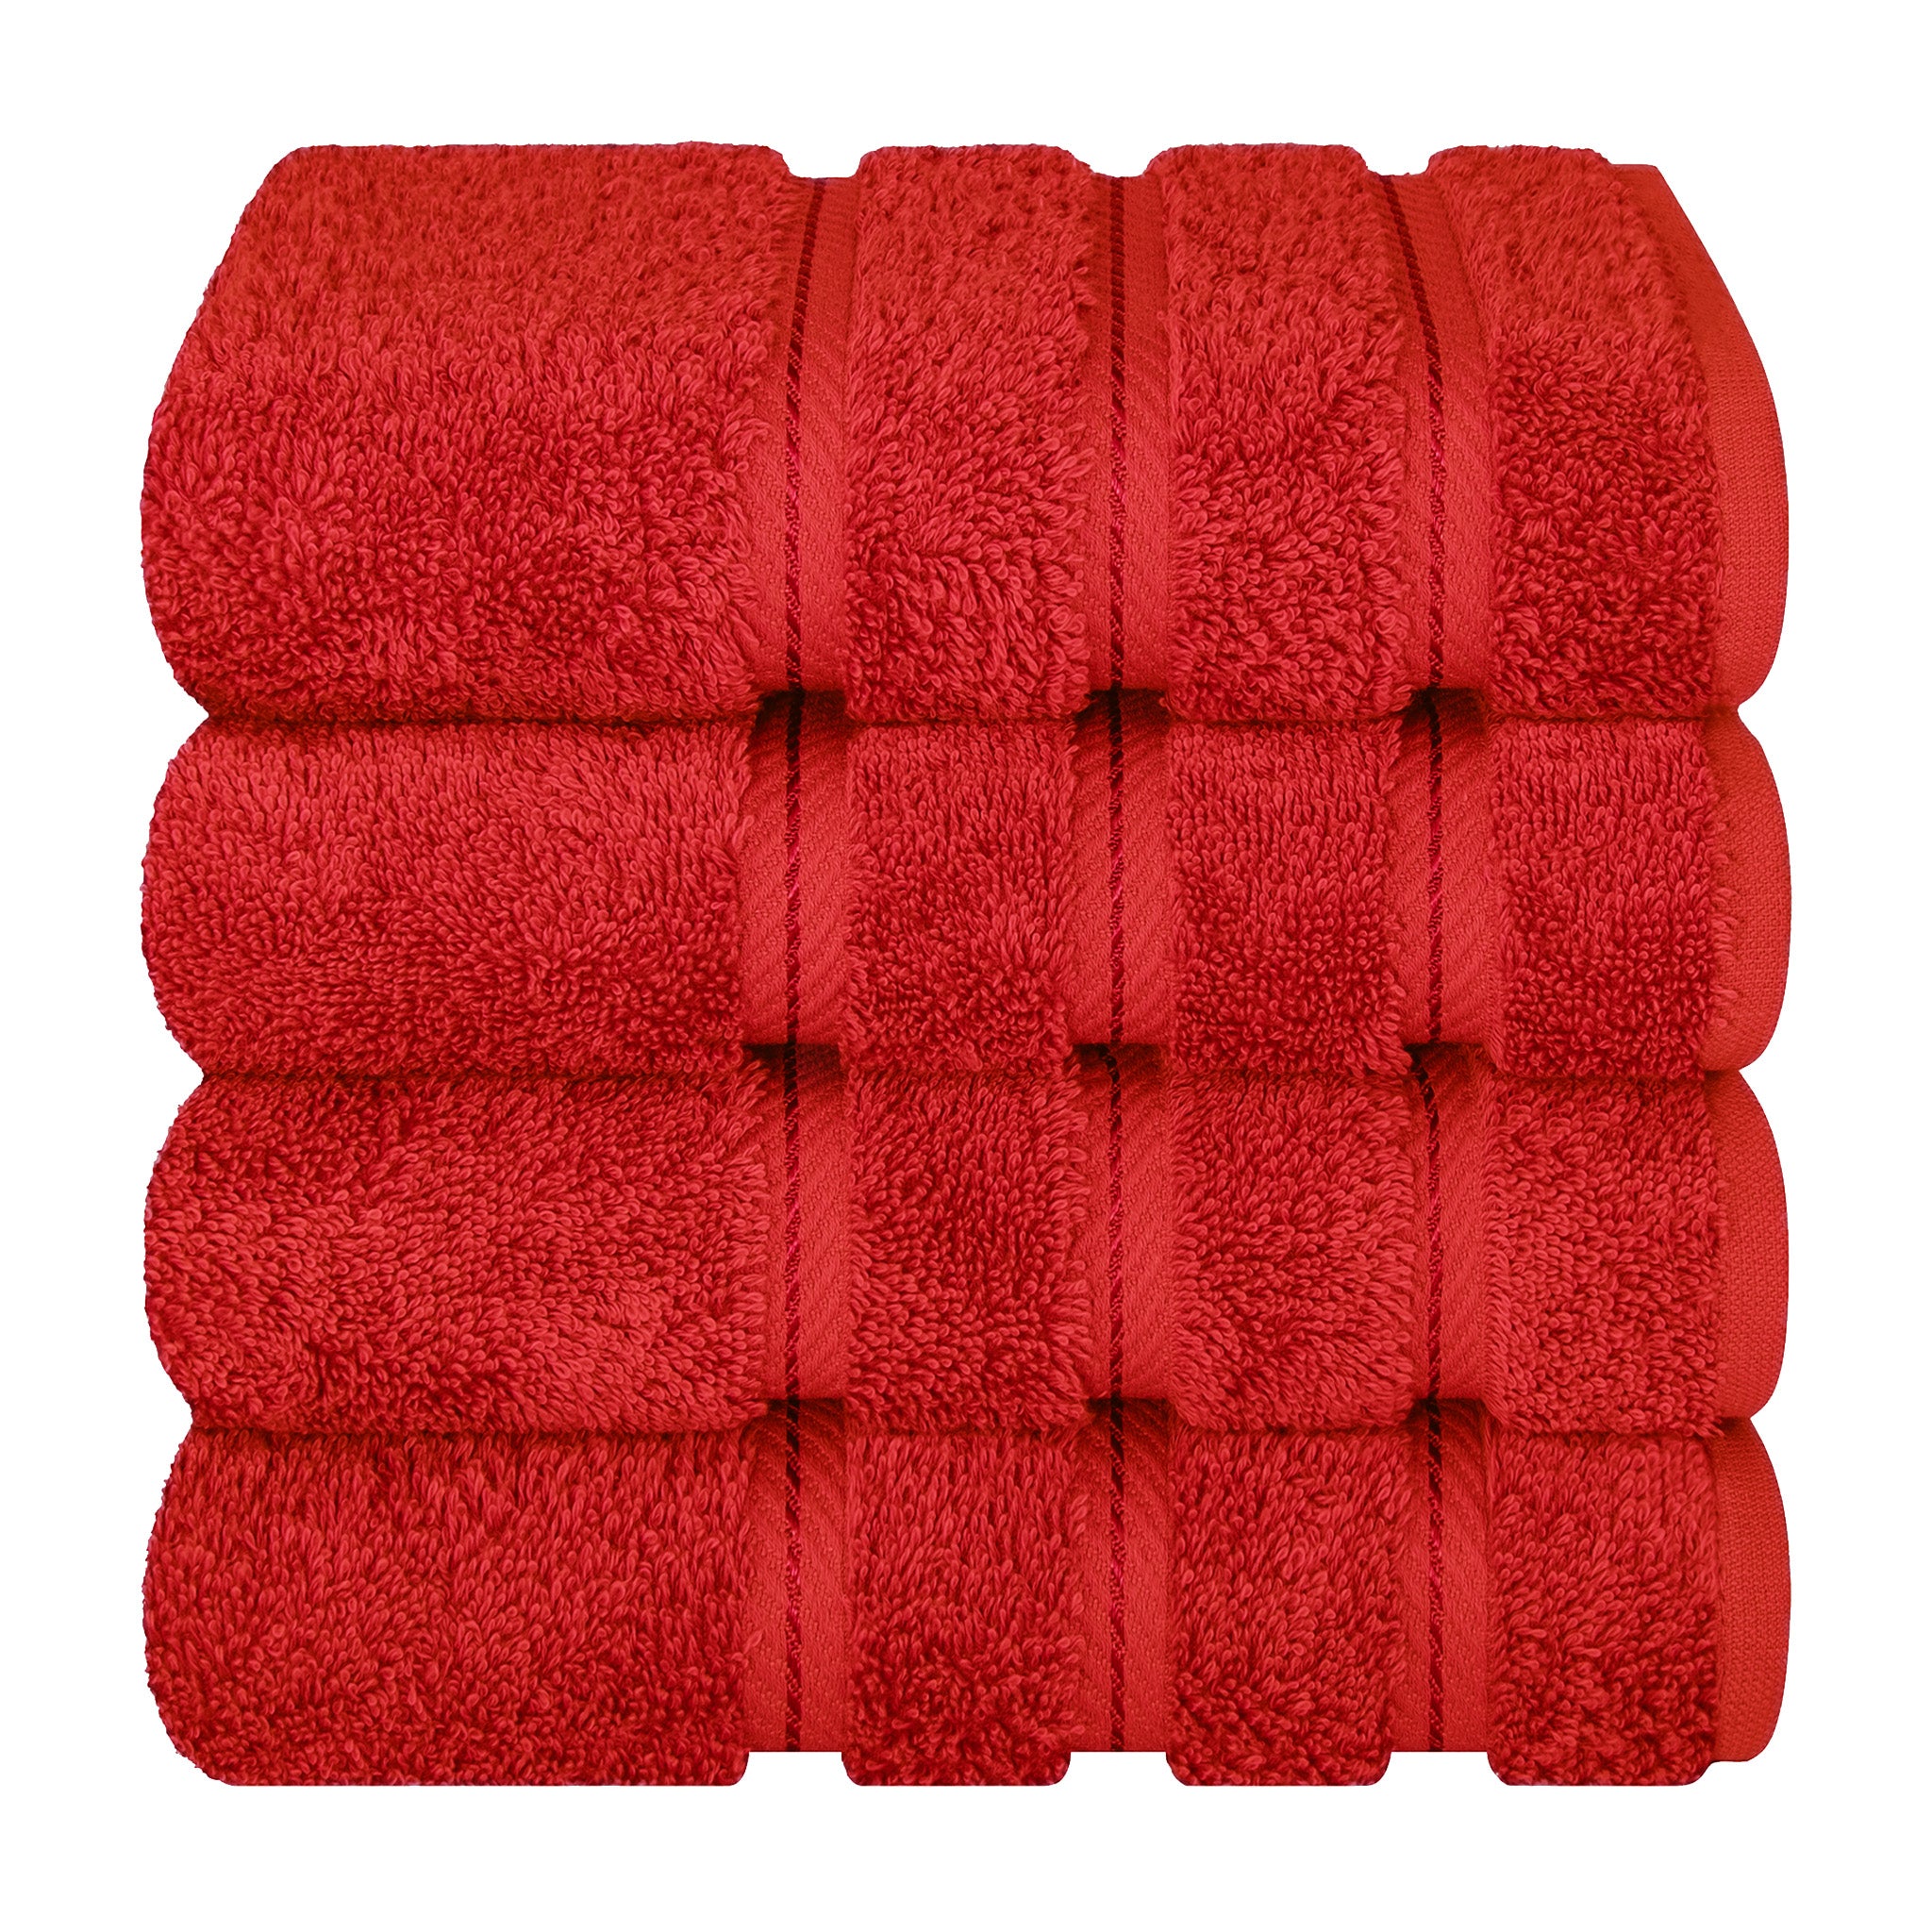 American Soft Linen 100% Turkish Cotton 4 Pack Hand Towel Set Wholesale red-7